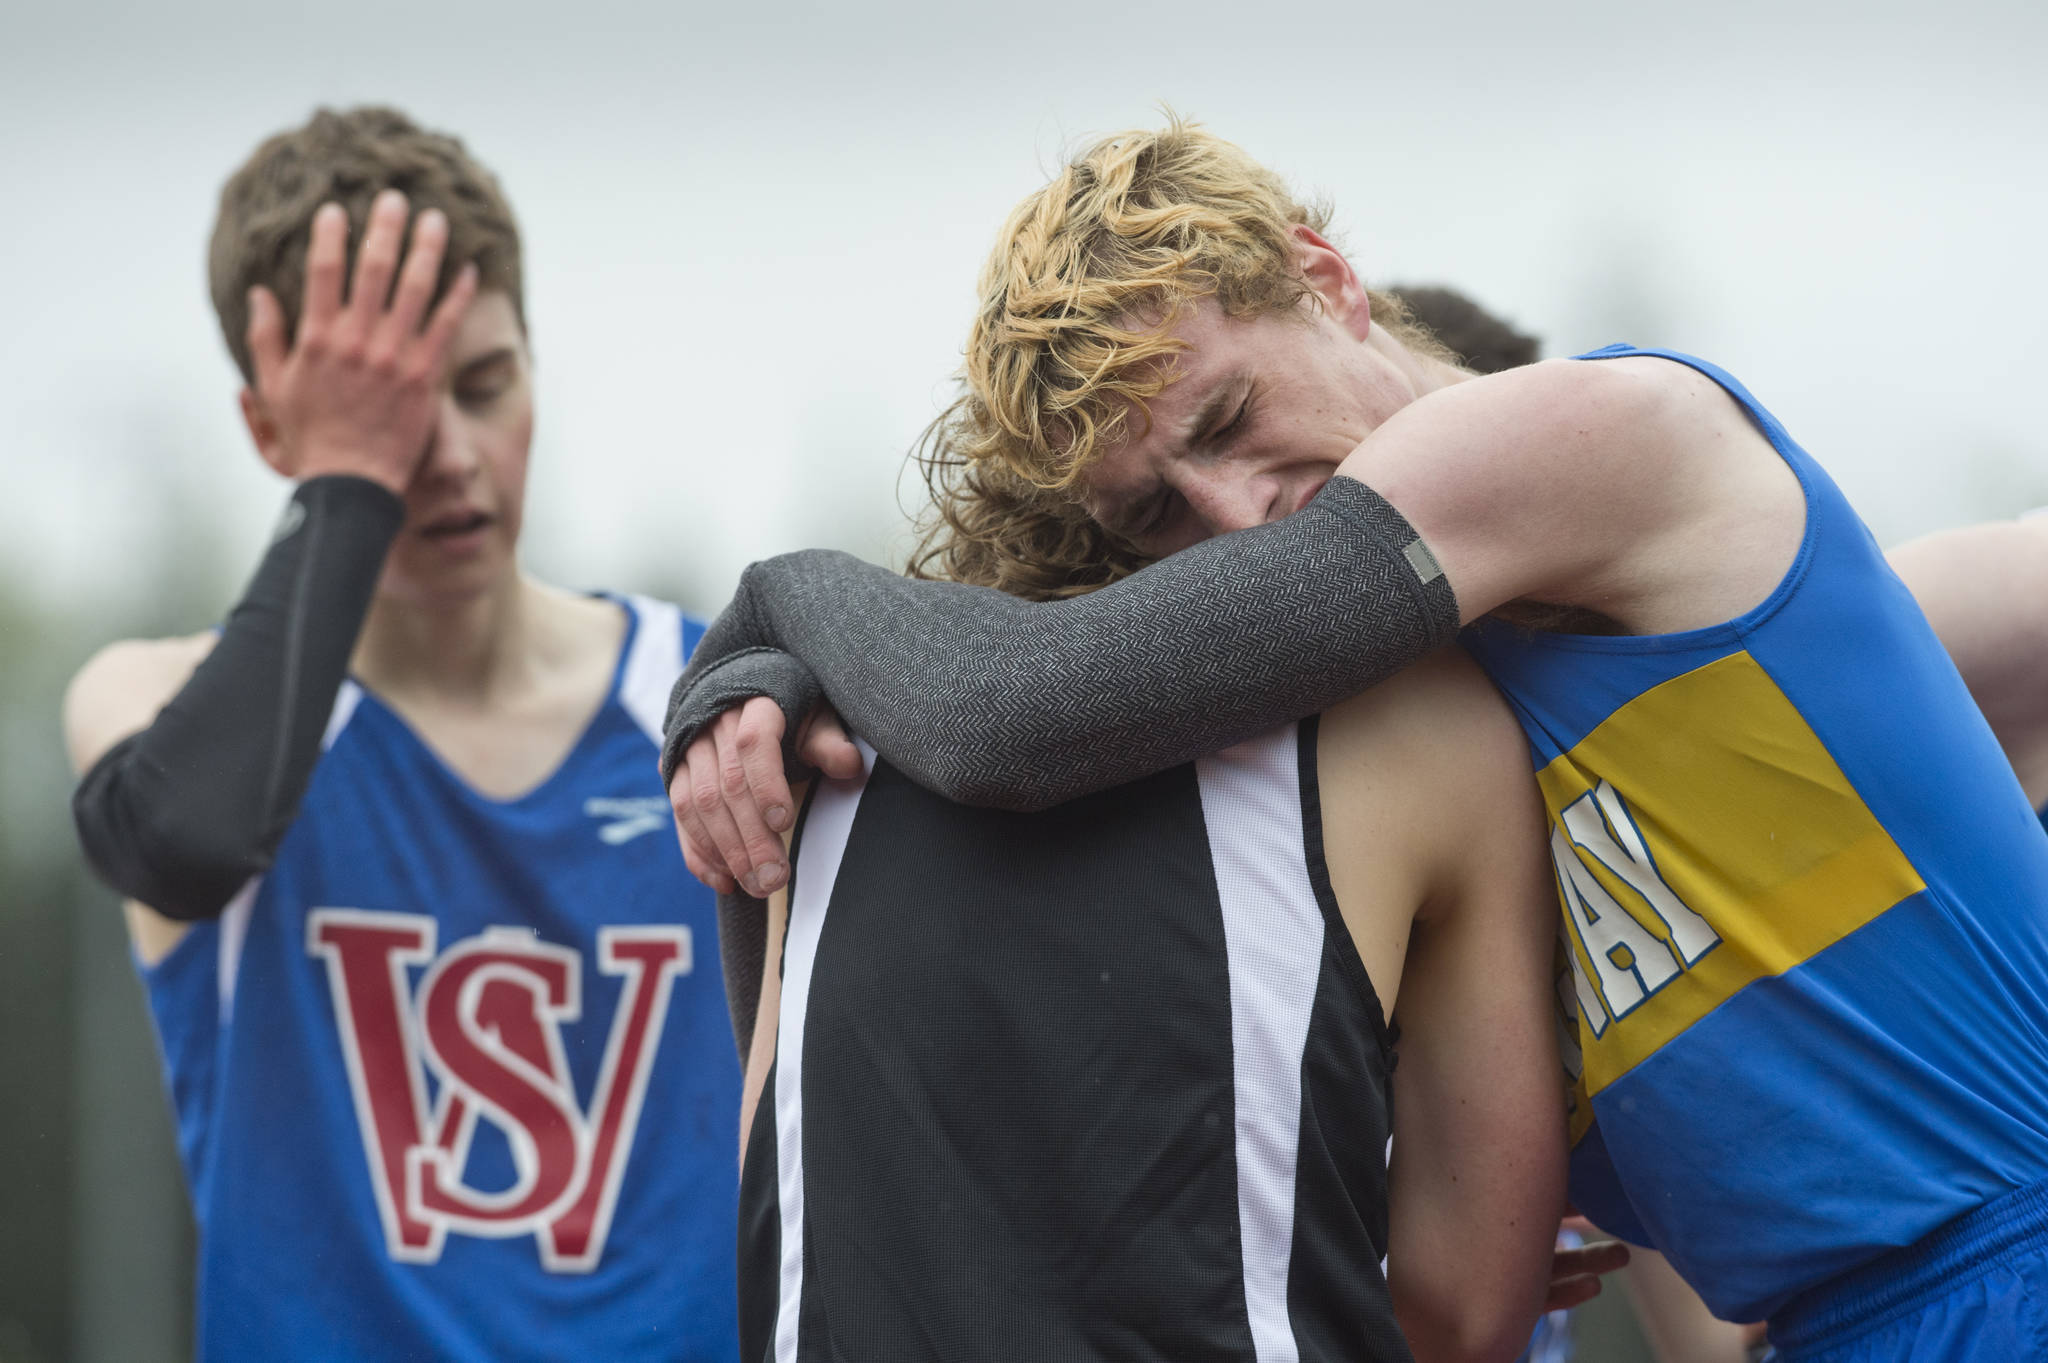 Skagway’s Ethan Goebel, right, cries on Juneau-Douglas’ Arne Ellefson-Carnes after winning the boys 3200 meter race at the Region V Track and Field meet at Thunder Mountain High School on Friday, May 19, 2017. Ellefson-Carnes took third and Sitka’s Colin Baciocco, left, took fifth. (Michael Penn | Juneau Empire)